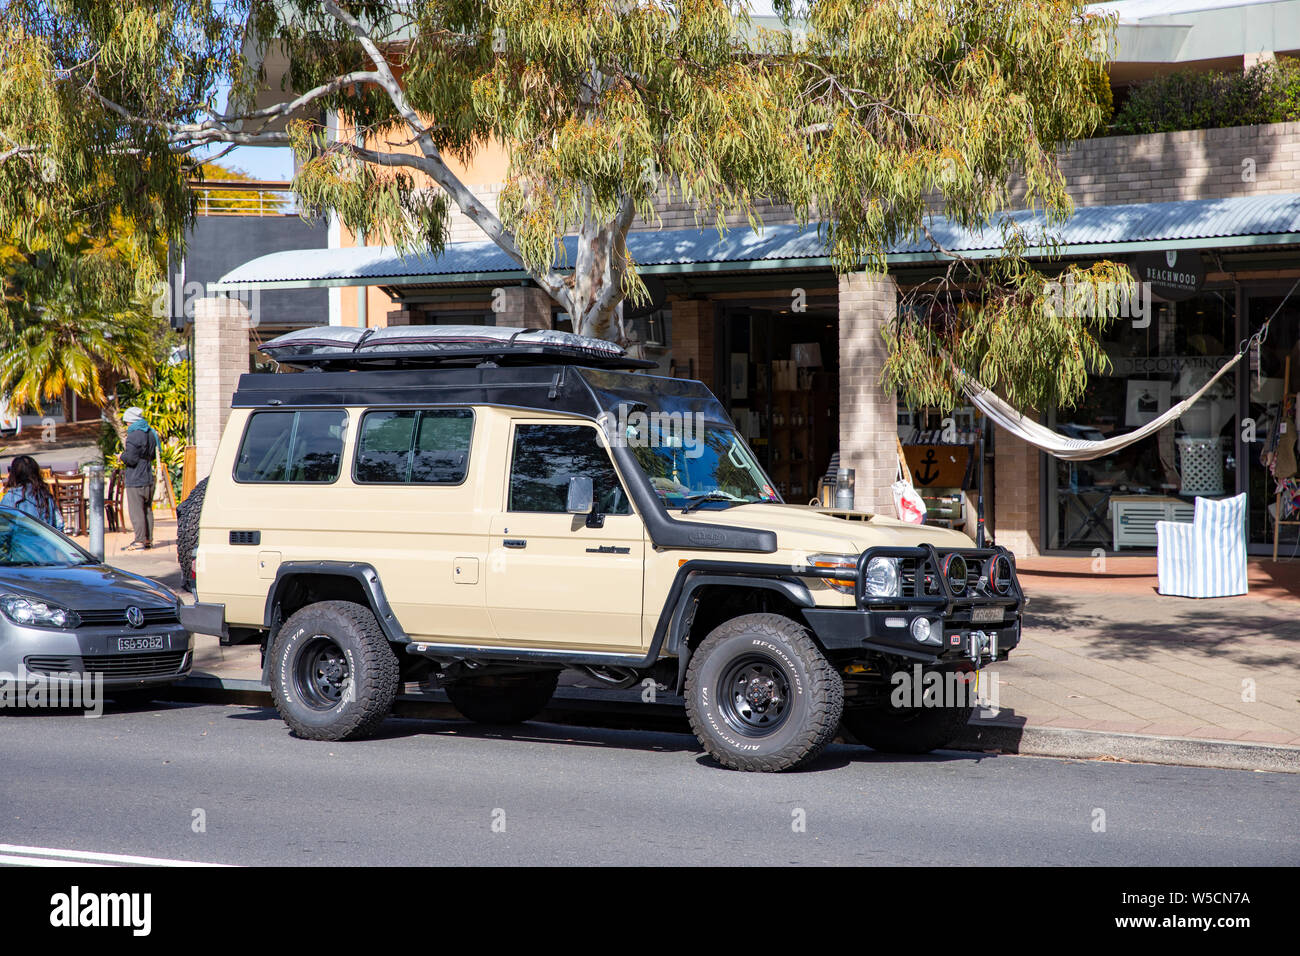 Toytoa landcruiser troopcarrier troopy 78 model in beige parked in a Sydney street but equipped for off road overlanding travel,Australia Stock Photo